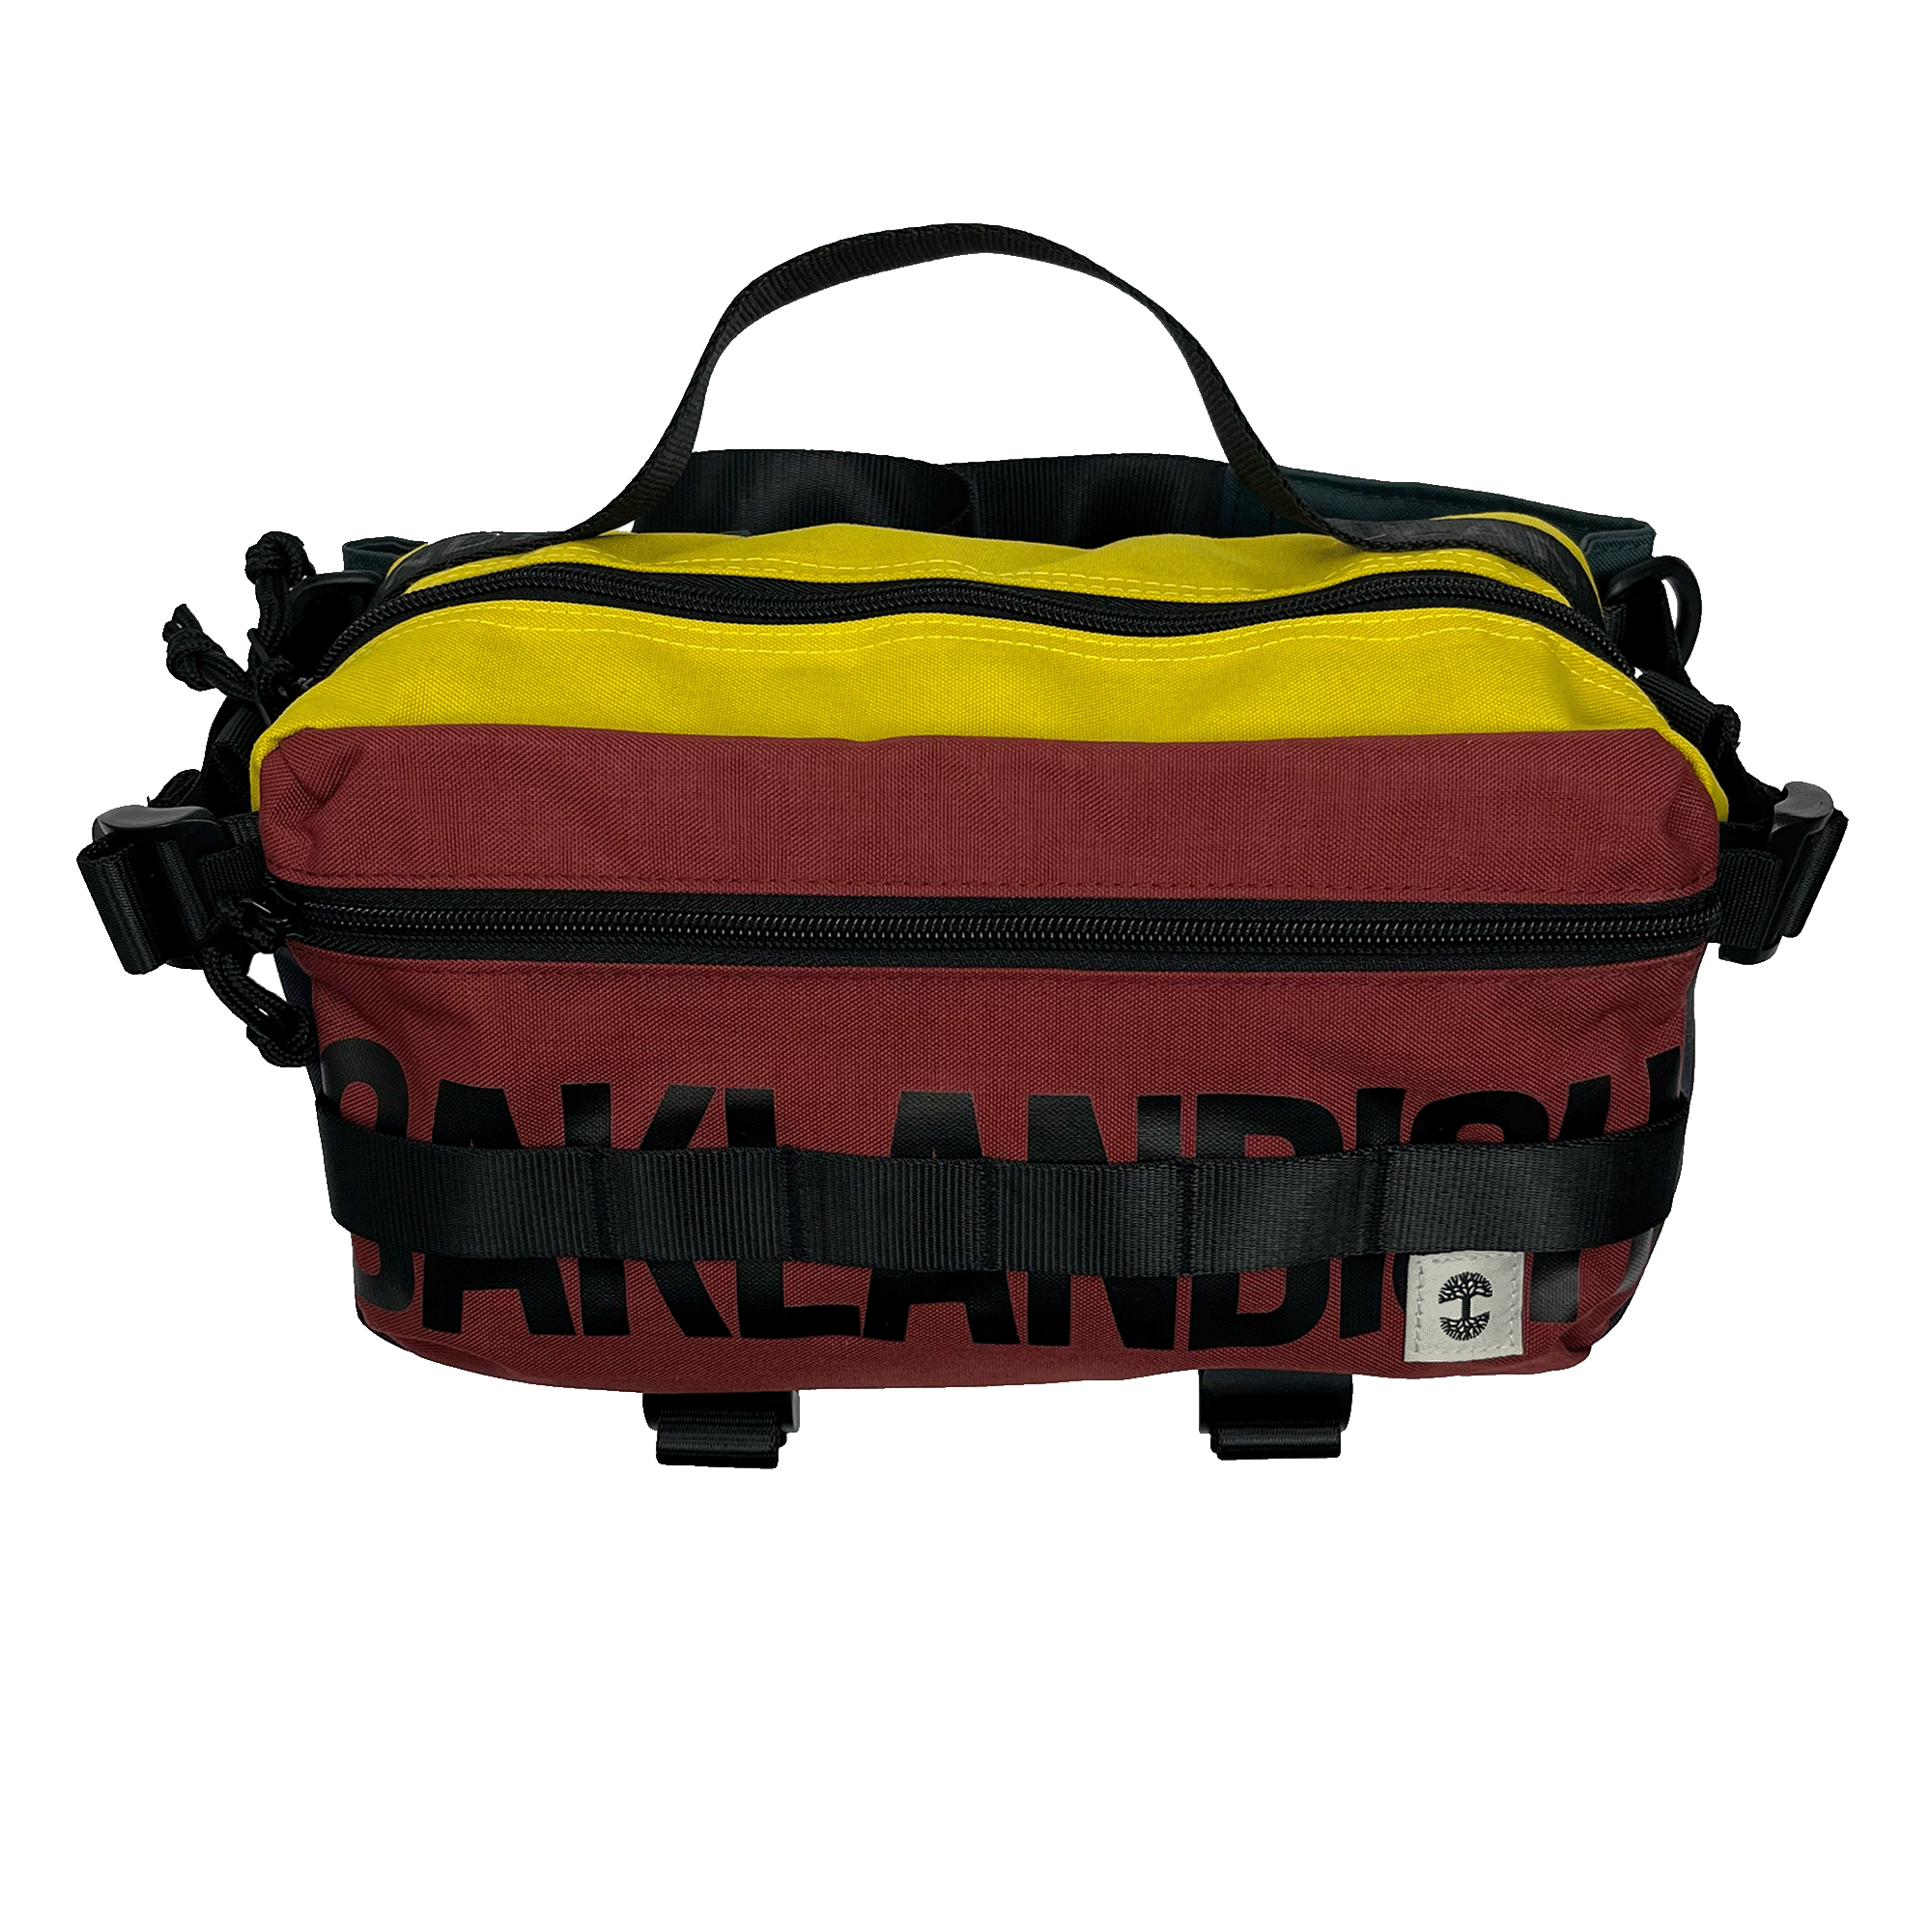 Front view of a red and yellow color-blocked cross-body bag with front zipper, large black Oakladish wordmark, and top handle.